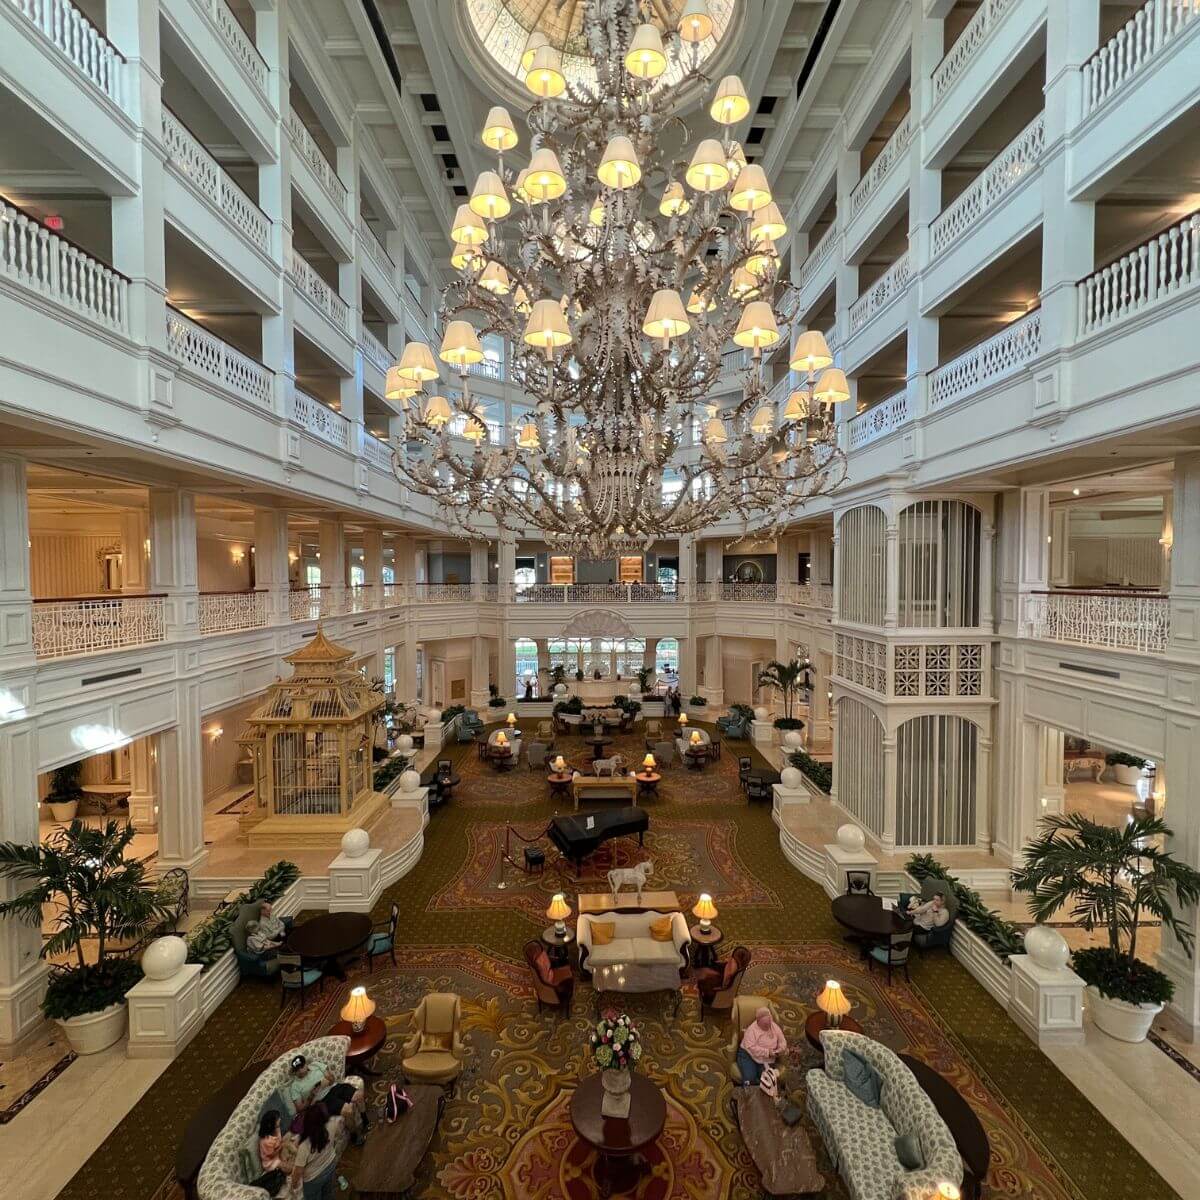 Photo looking across the Grand Floridian Resort Lobby from the second floor.